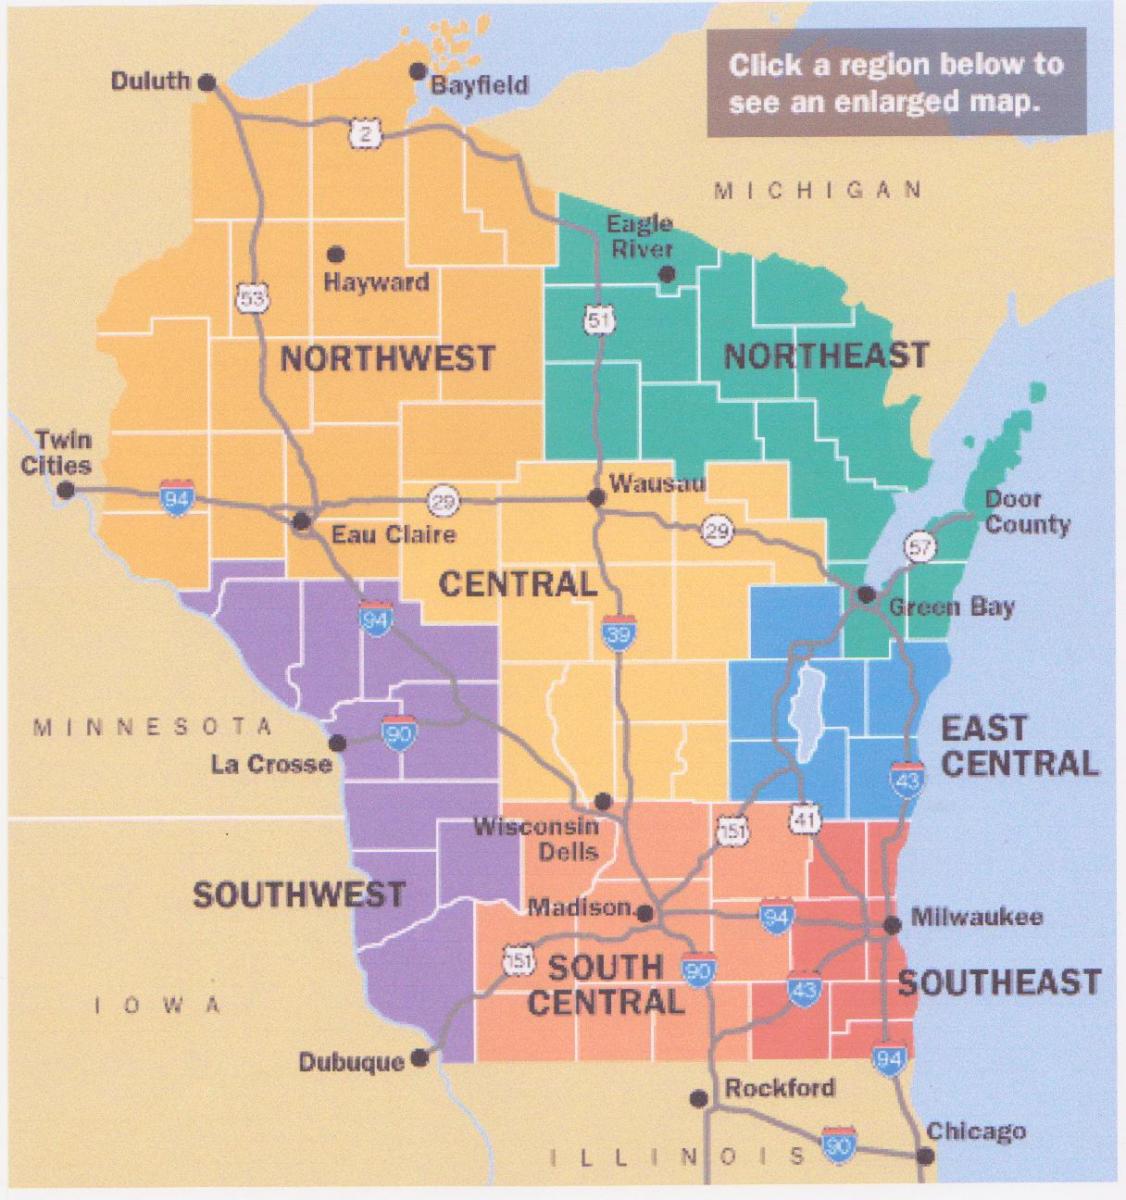 Highway and Regional Map of Wisconsin